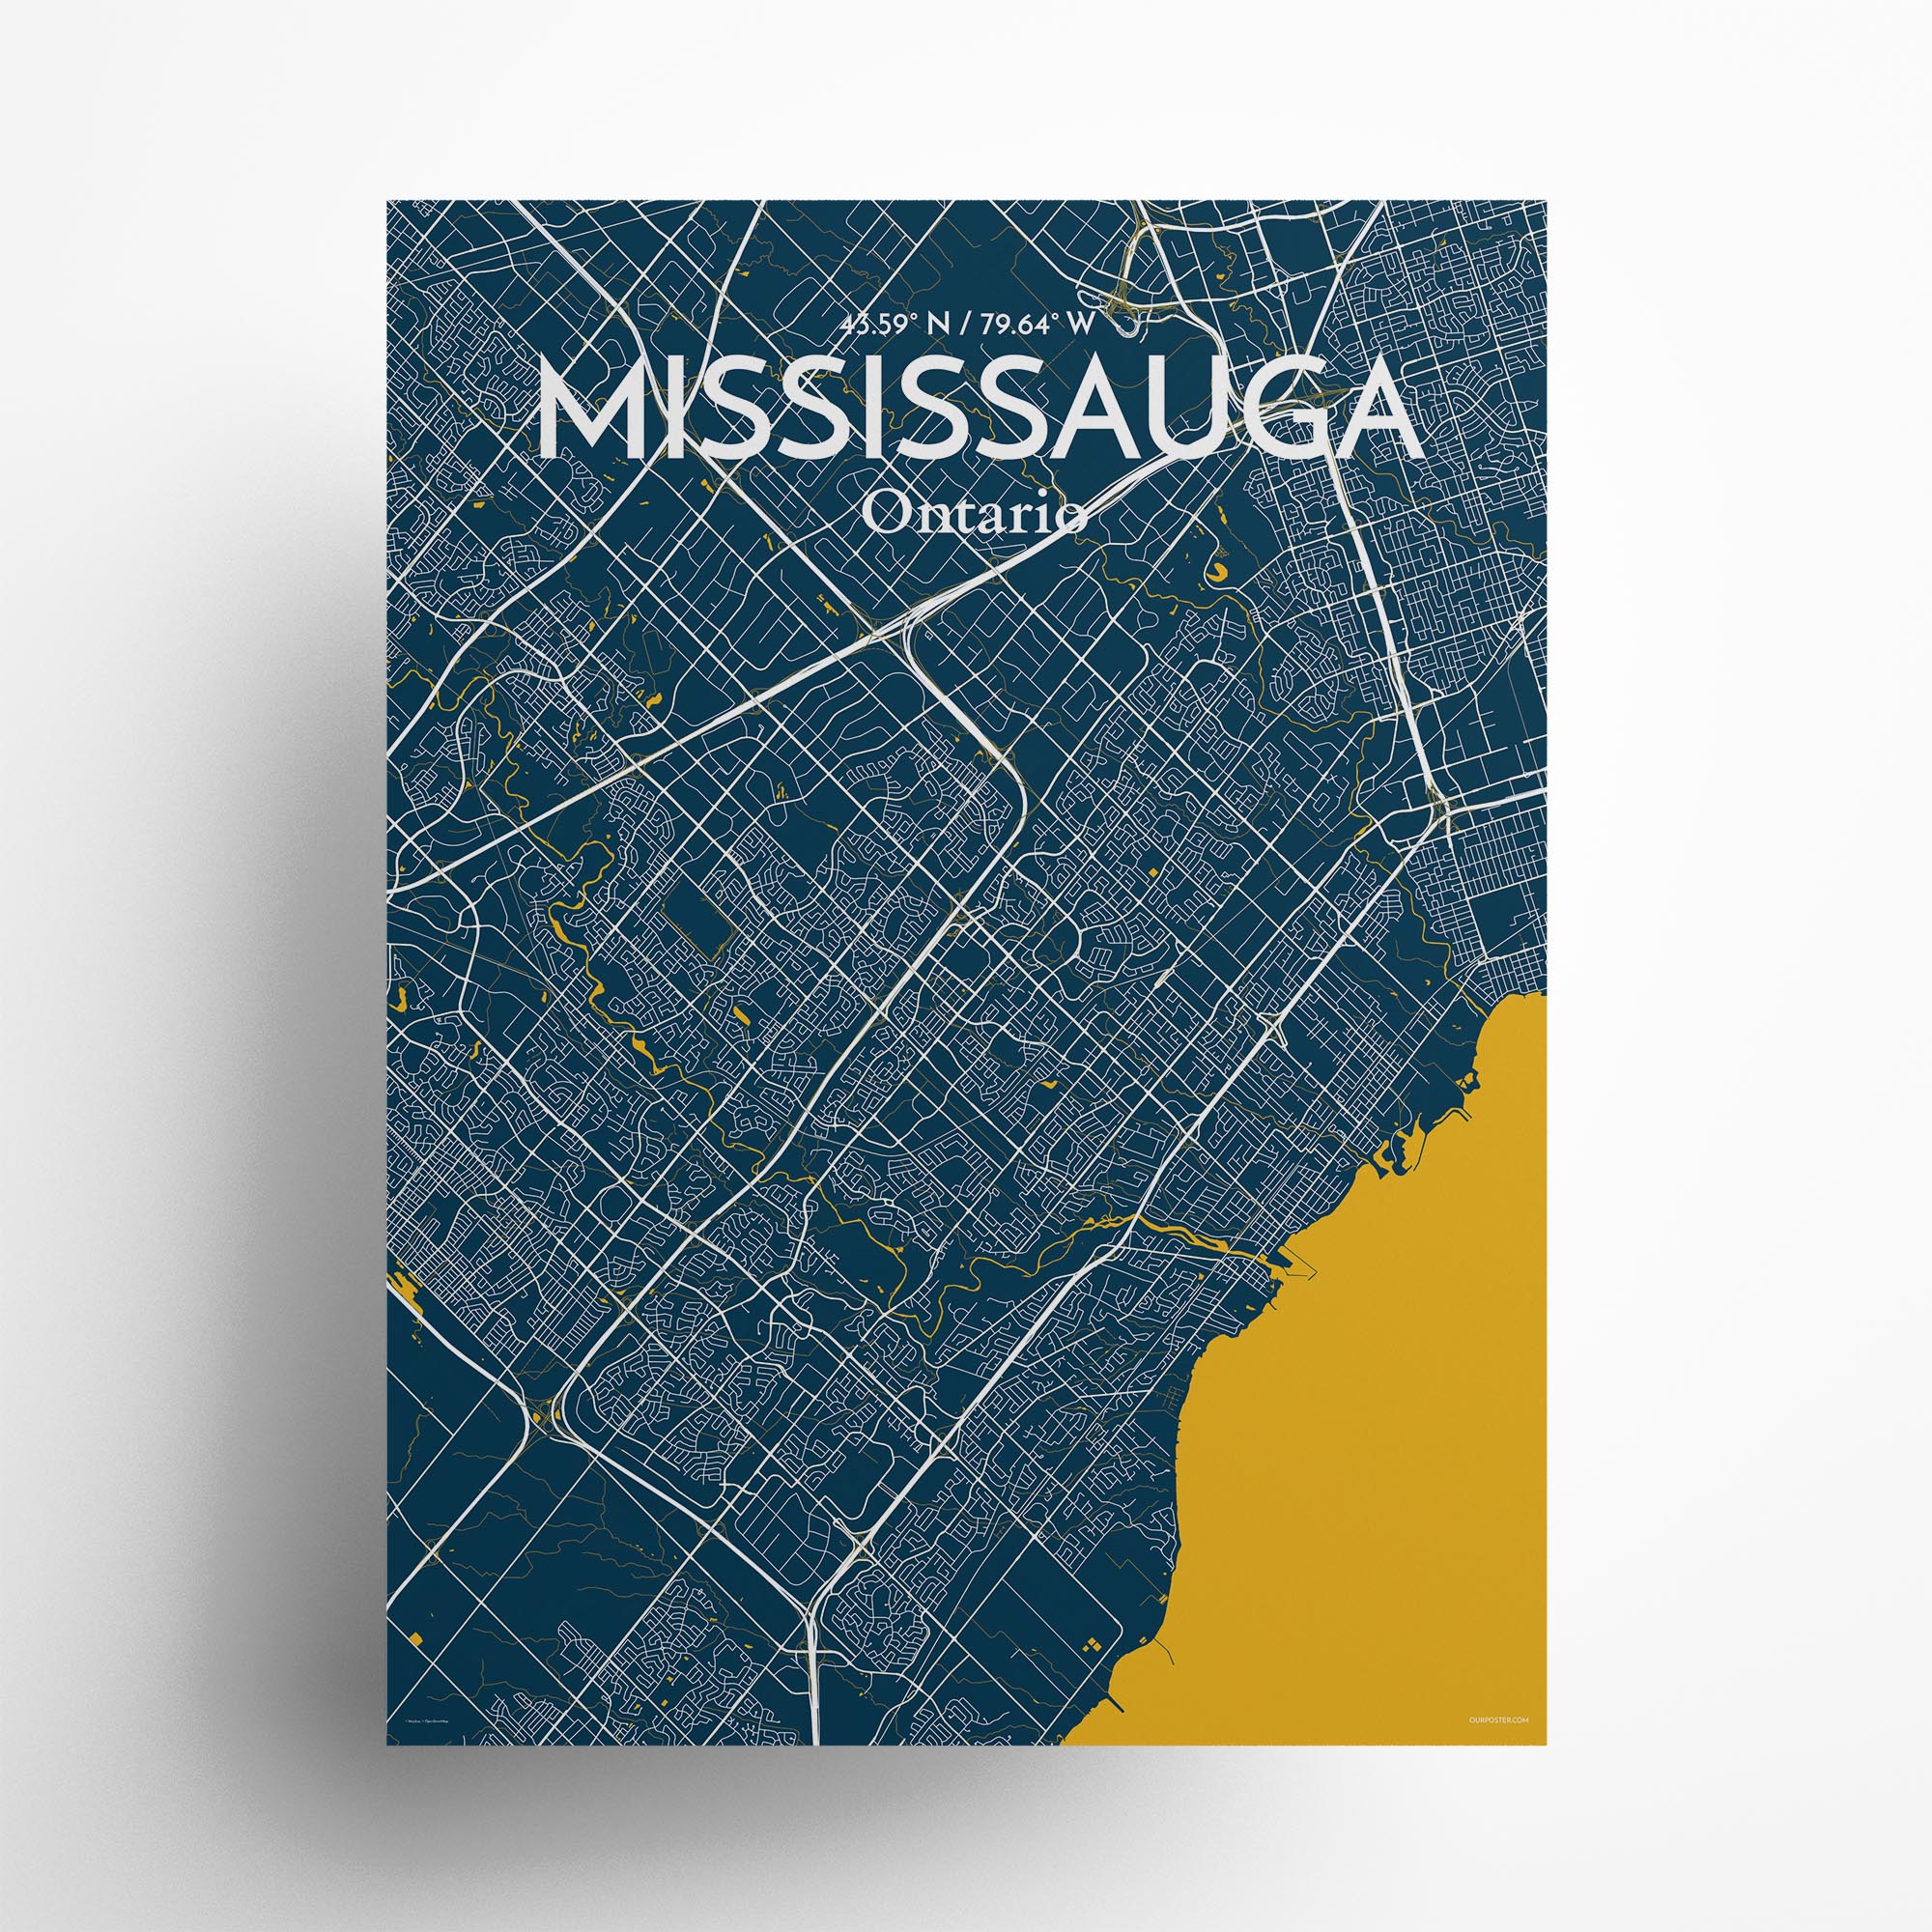 Mississauga city map poster in Amuse of size 18" x 24"